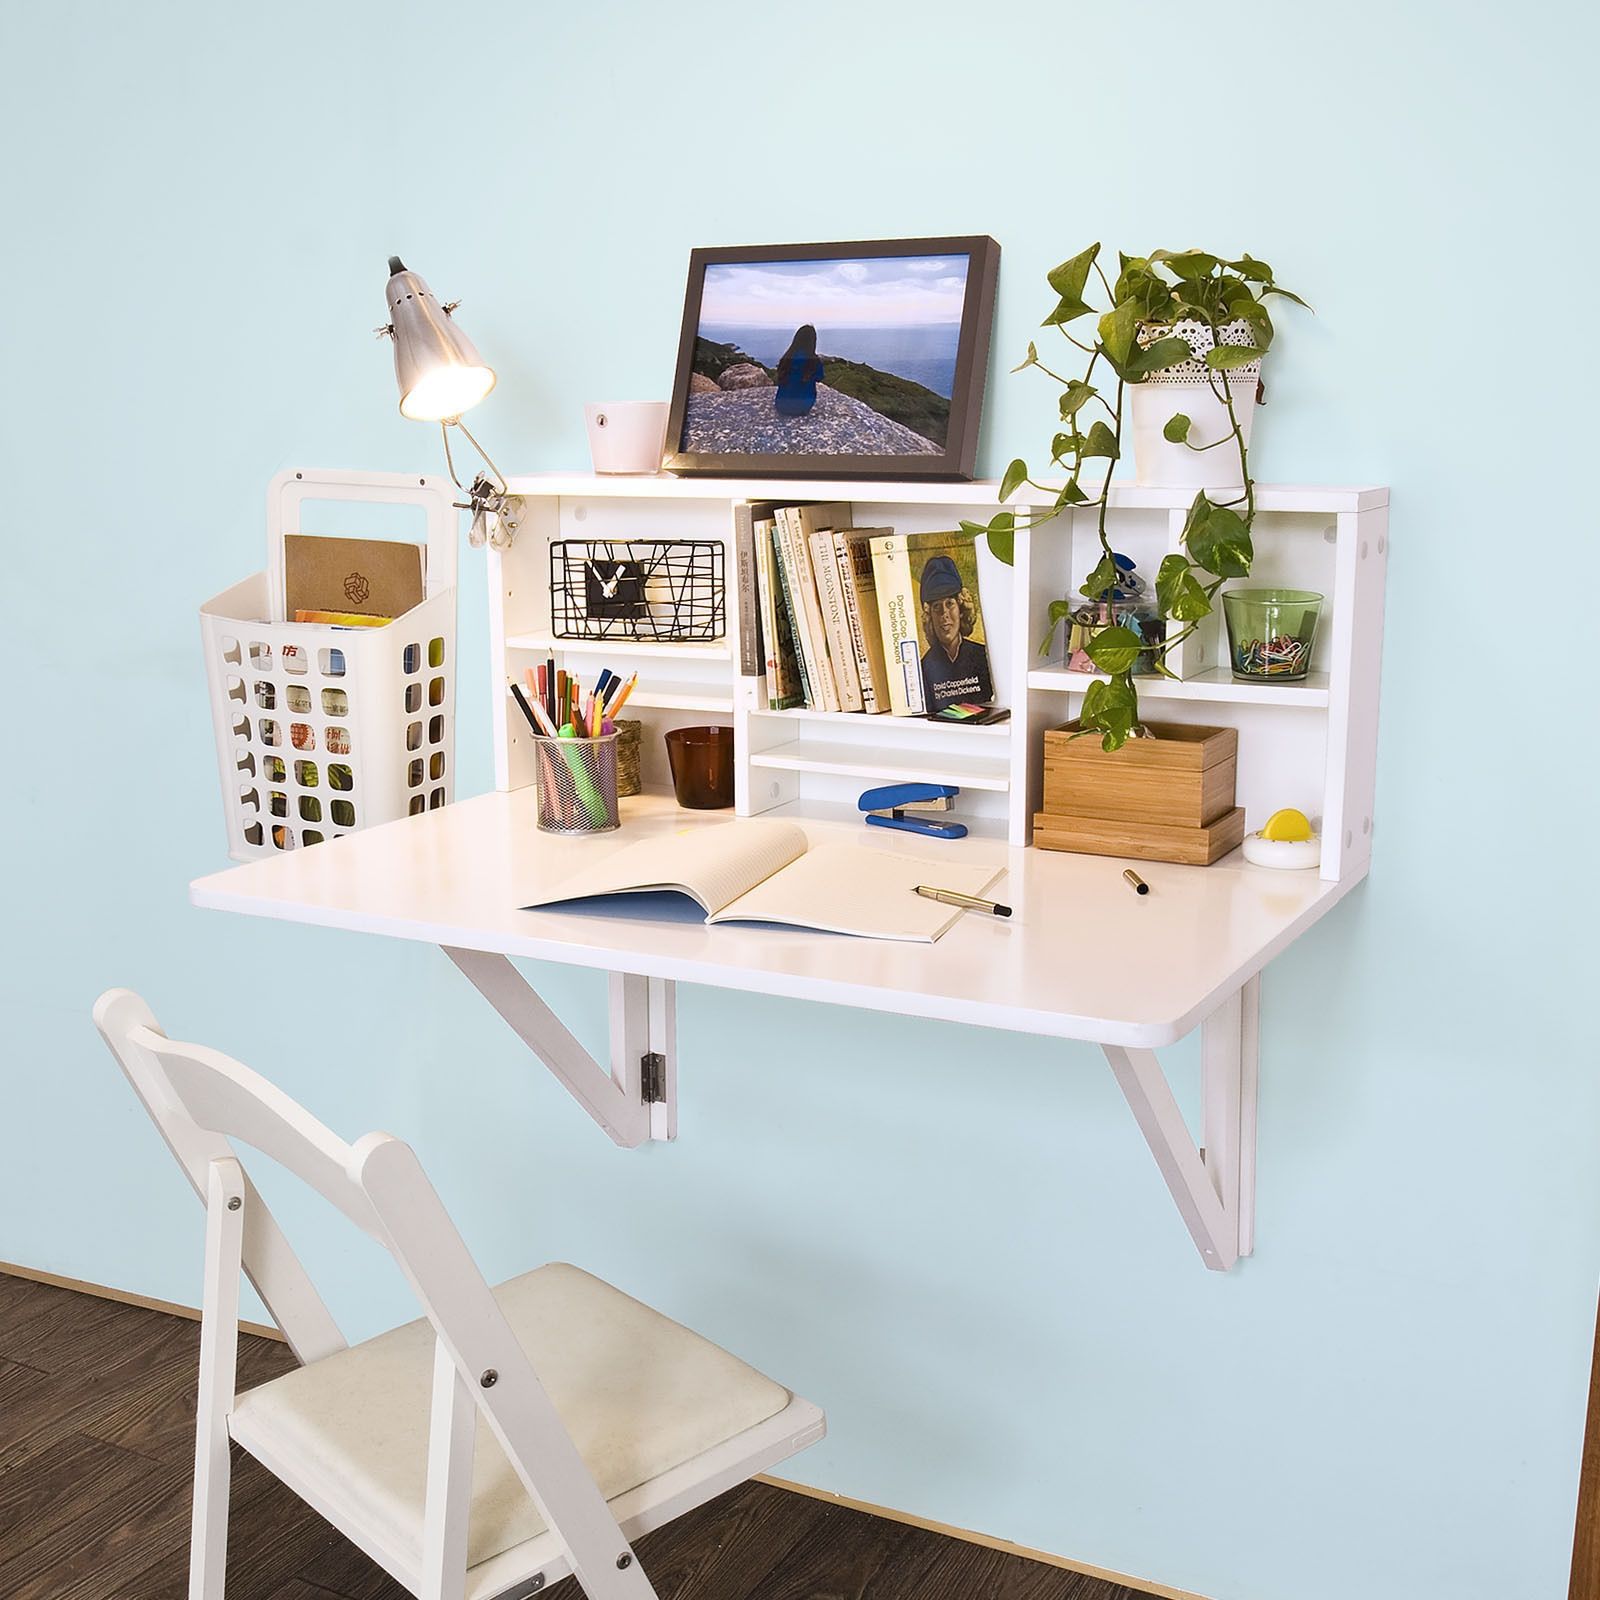 Wall Mounted Foldable Tablewall Shelf Table Kitchen Dining Table For Study Desk With Bookshelf (View 4 of 15)